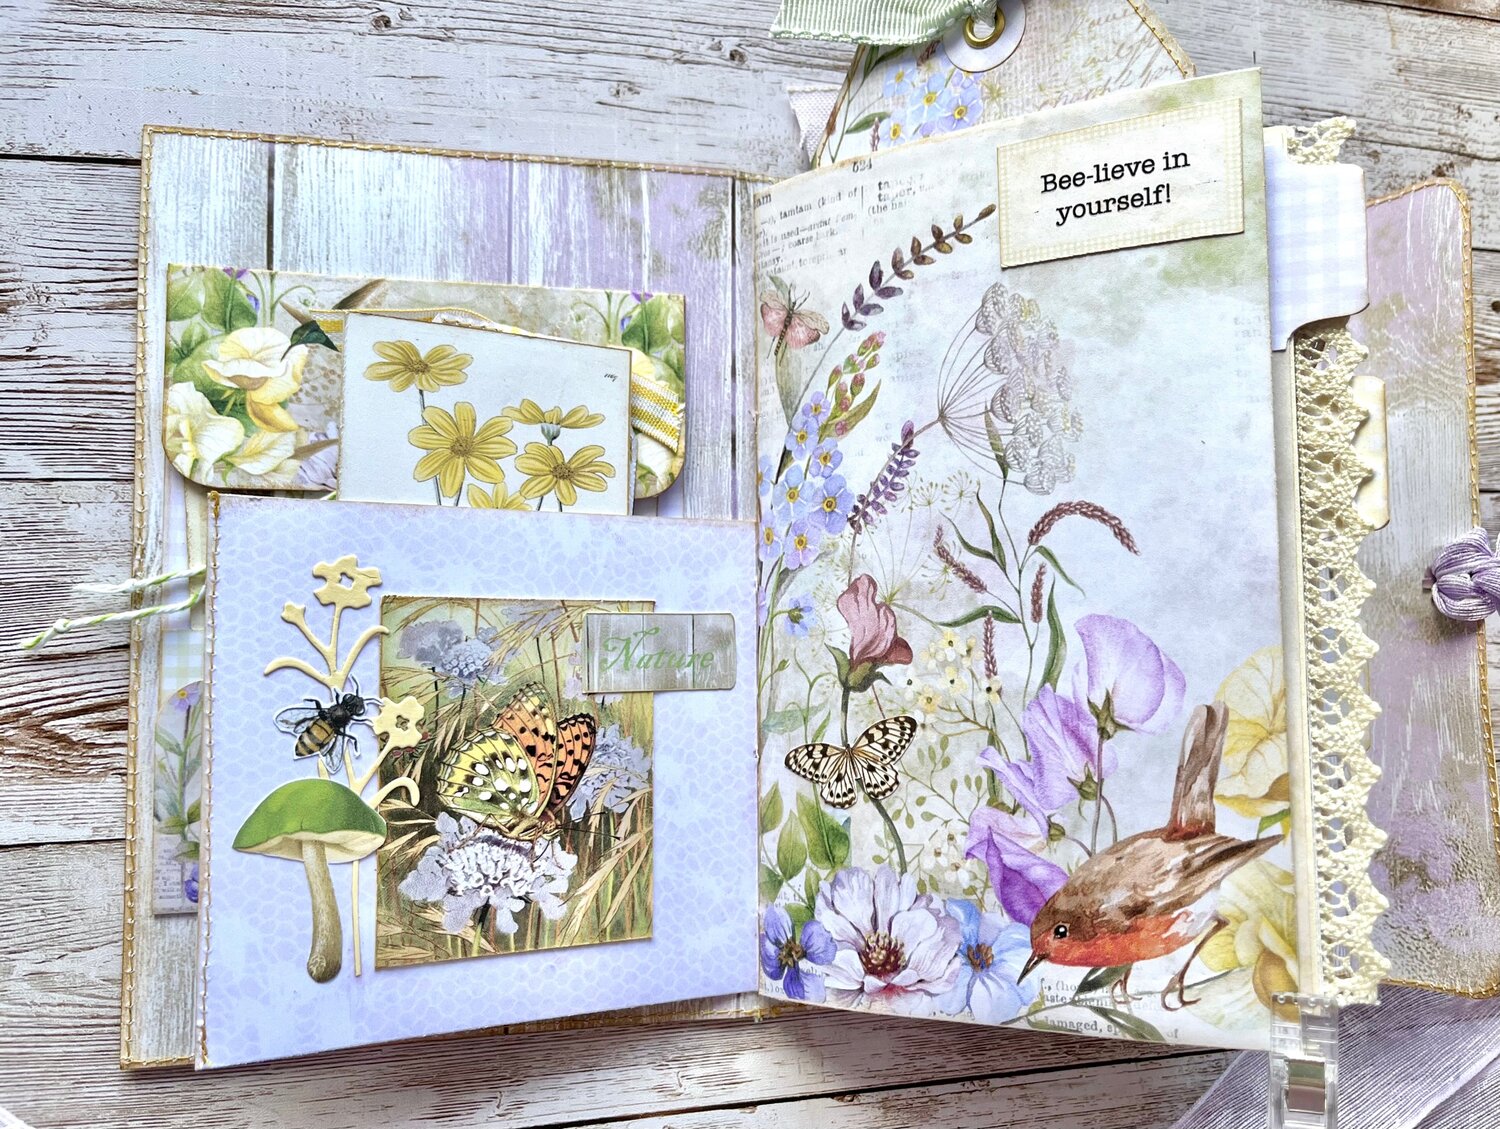 Decorative Floral - Journal Kit – together @withkx